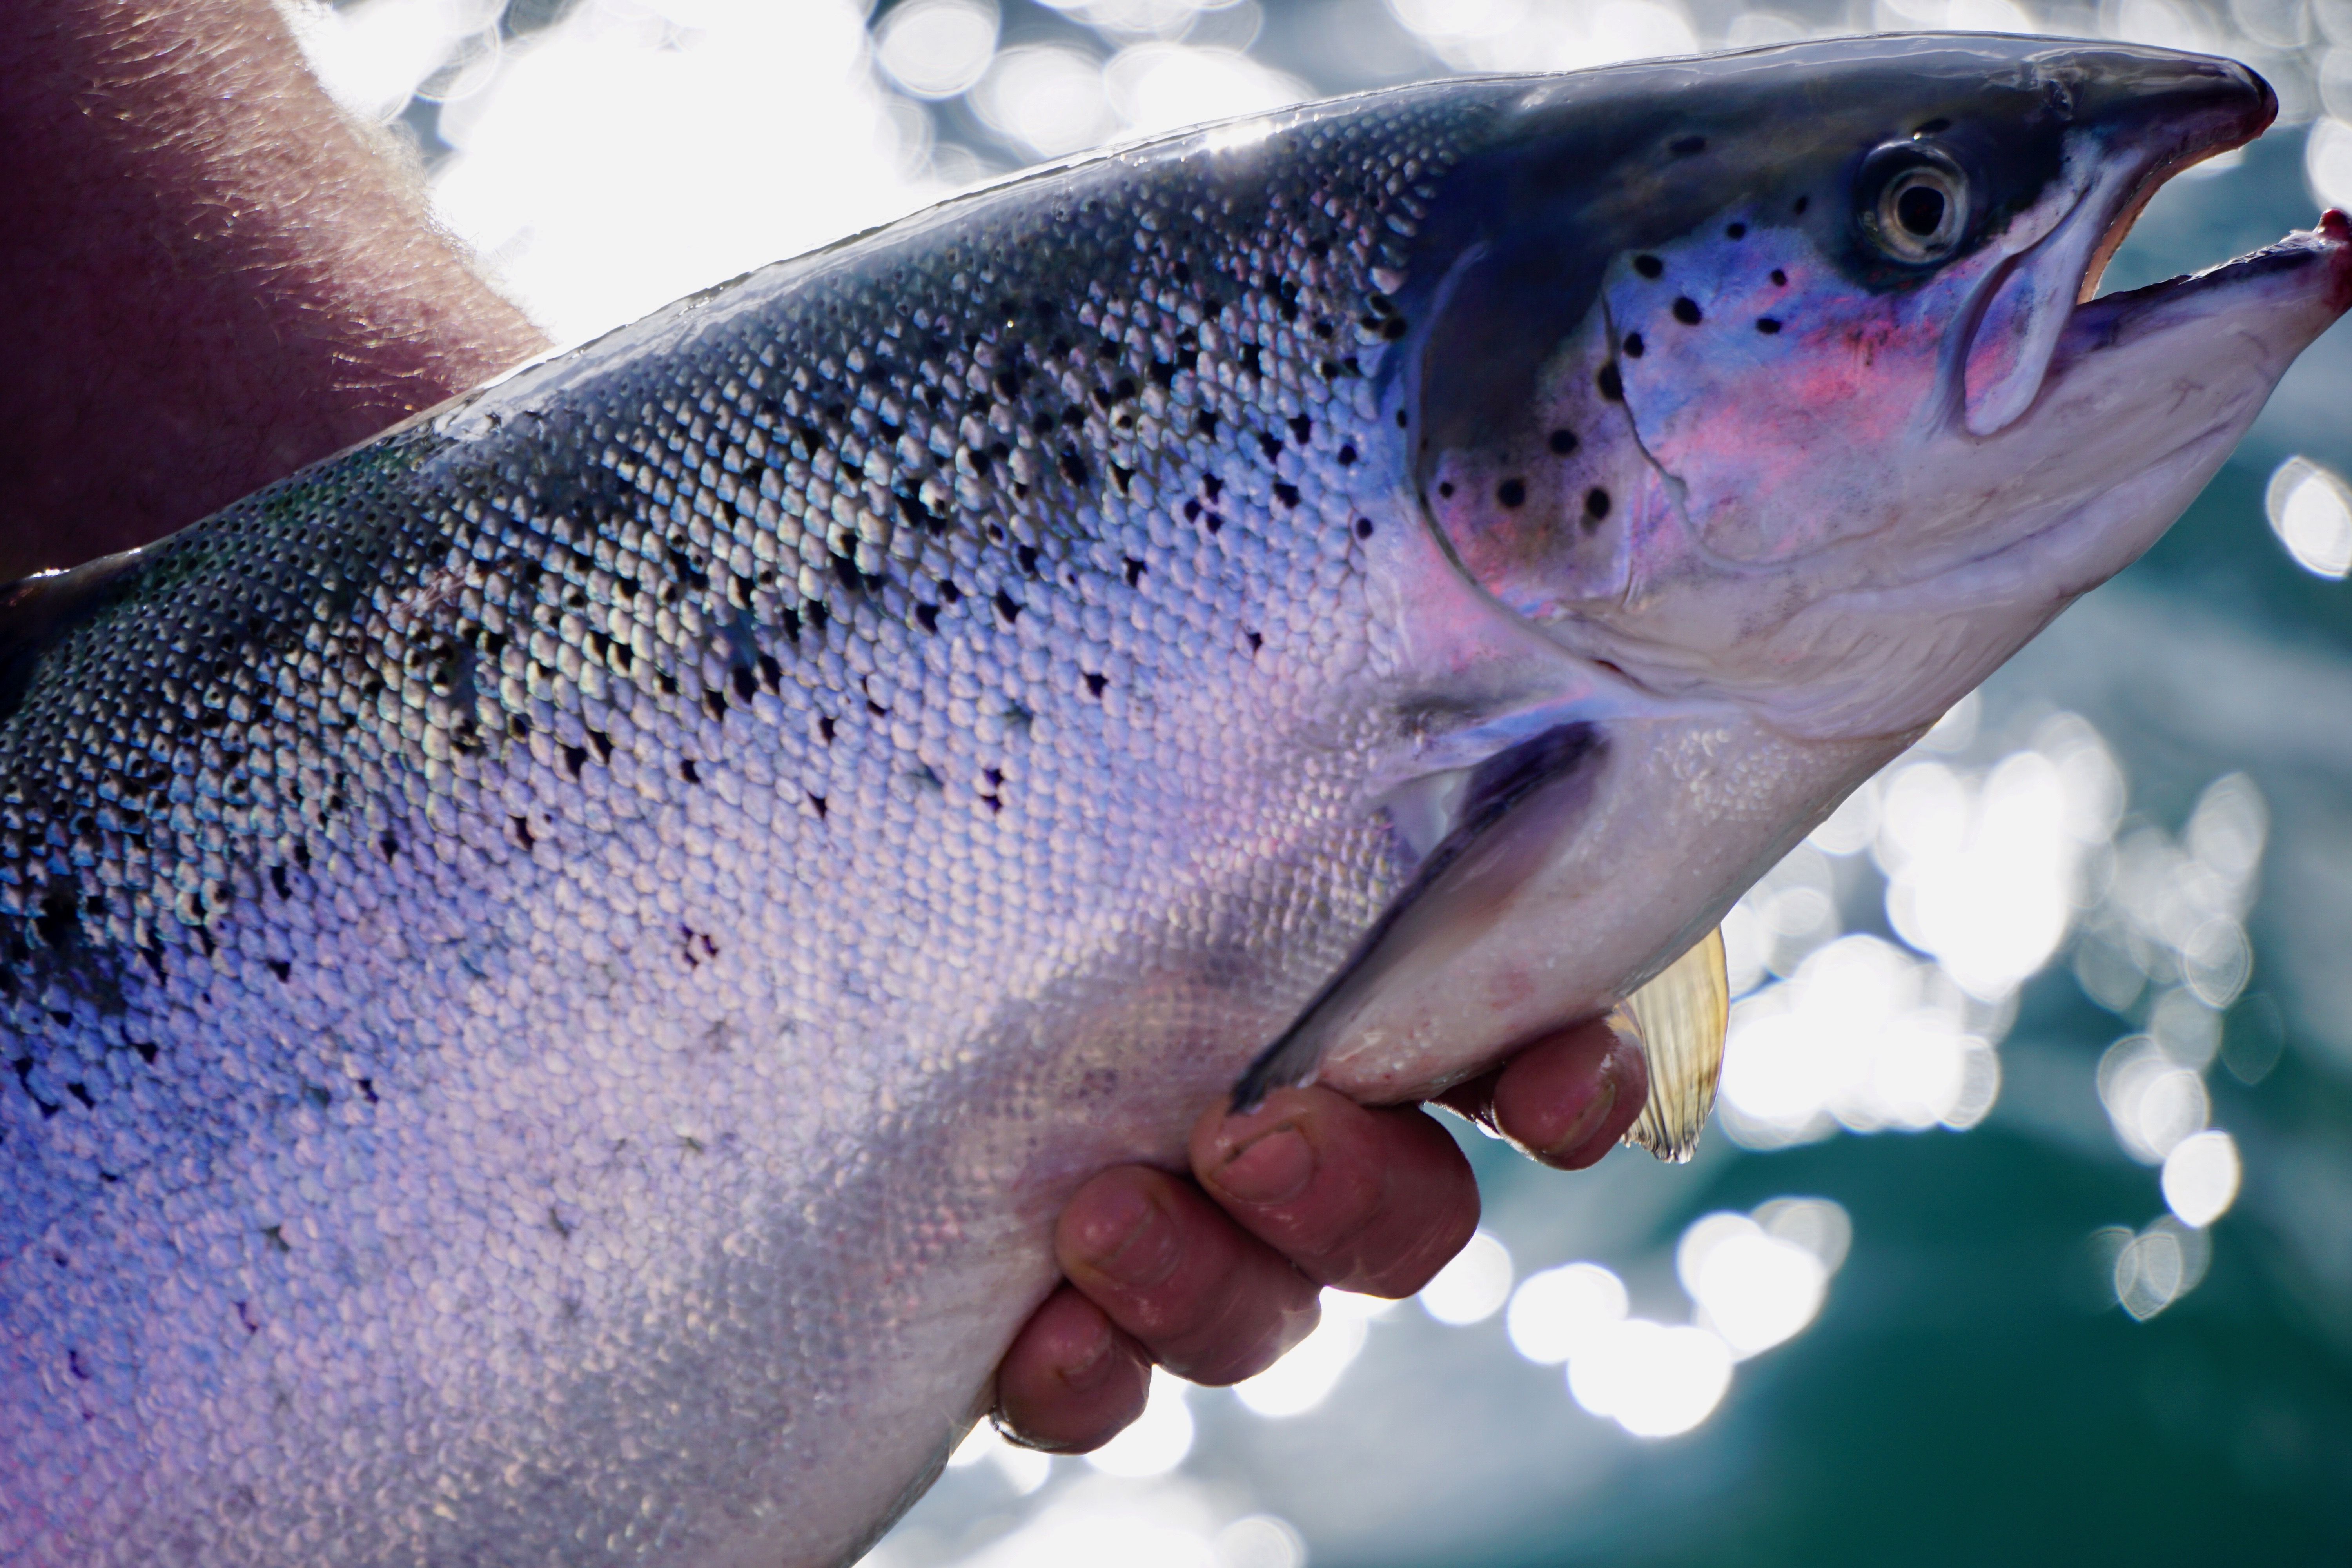 Salmon farmers are talking about investing money and time in helping to improve the habitat of rivers and estuaries